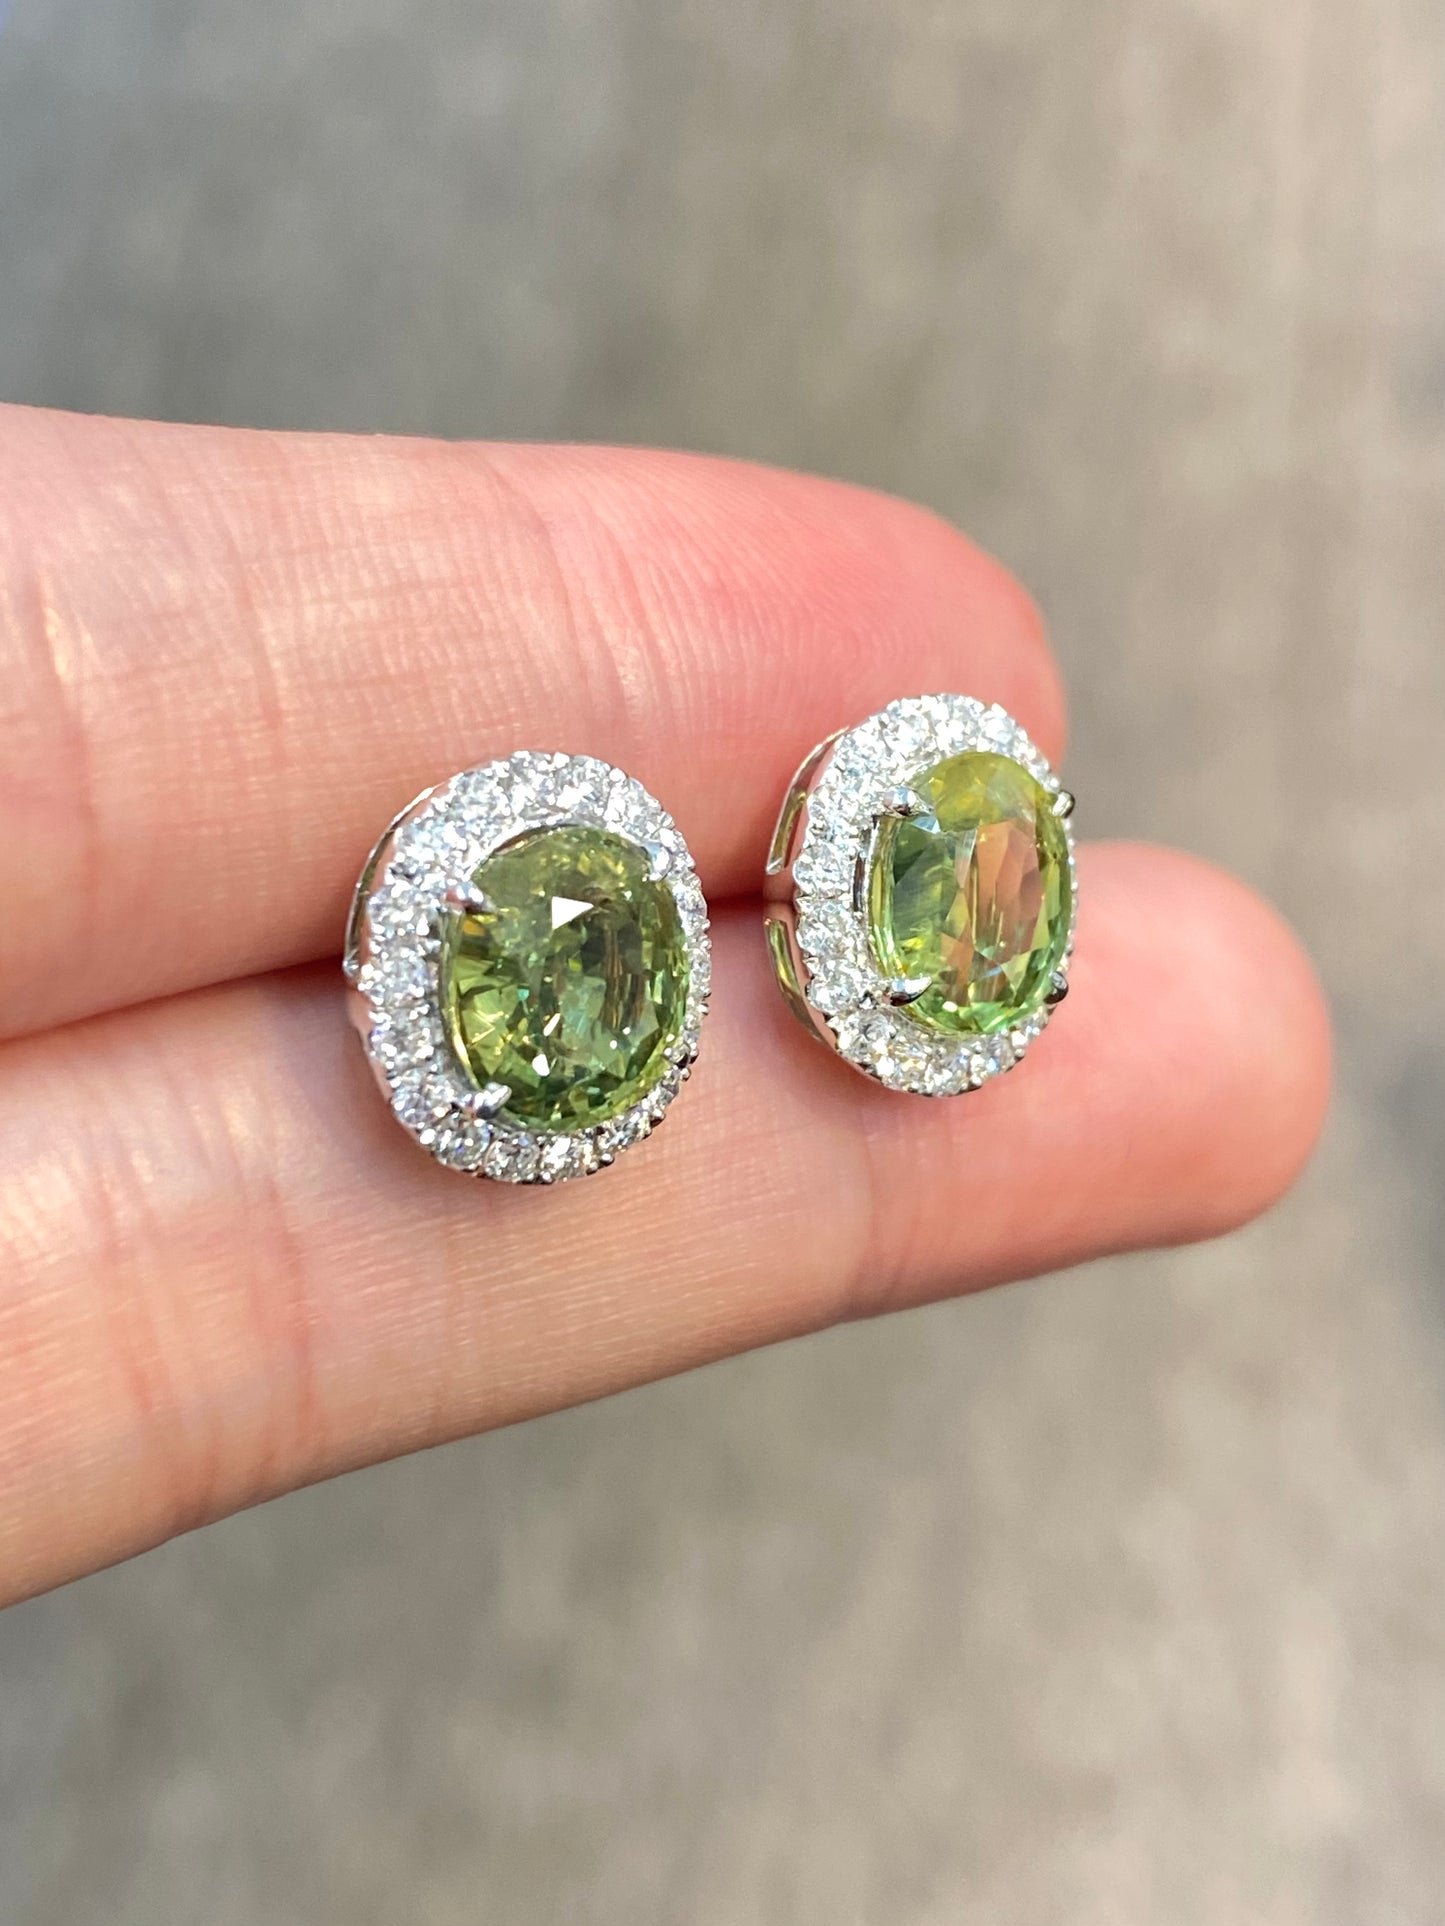 Natural Unheated Yellowish Green Sapphire Ring 4.76ct Set With Natural Diamonds In 18K White Gold Gemstone Fine Jewellery Singapore